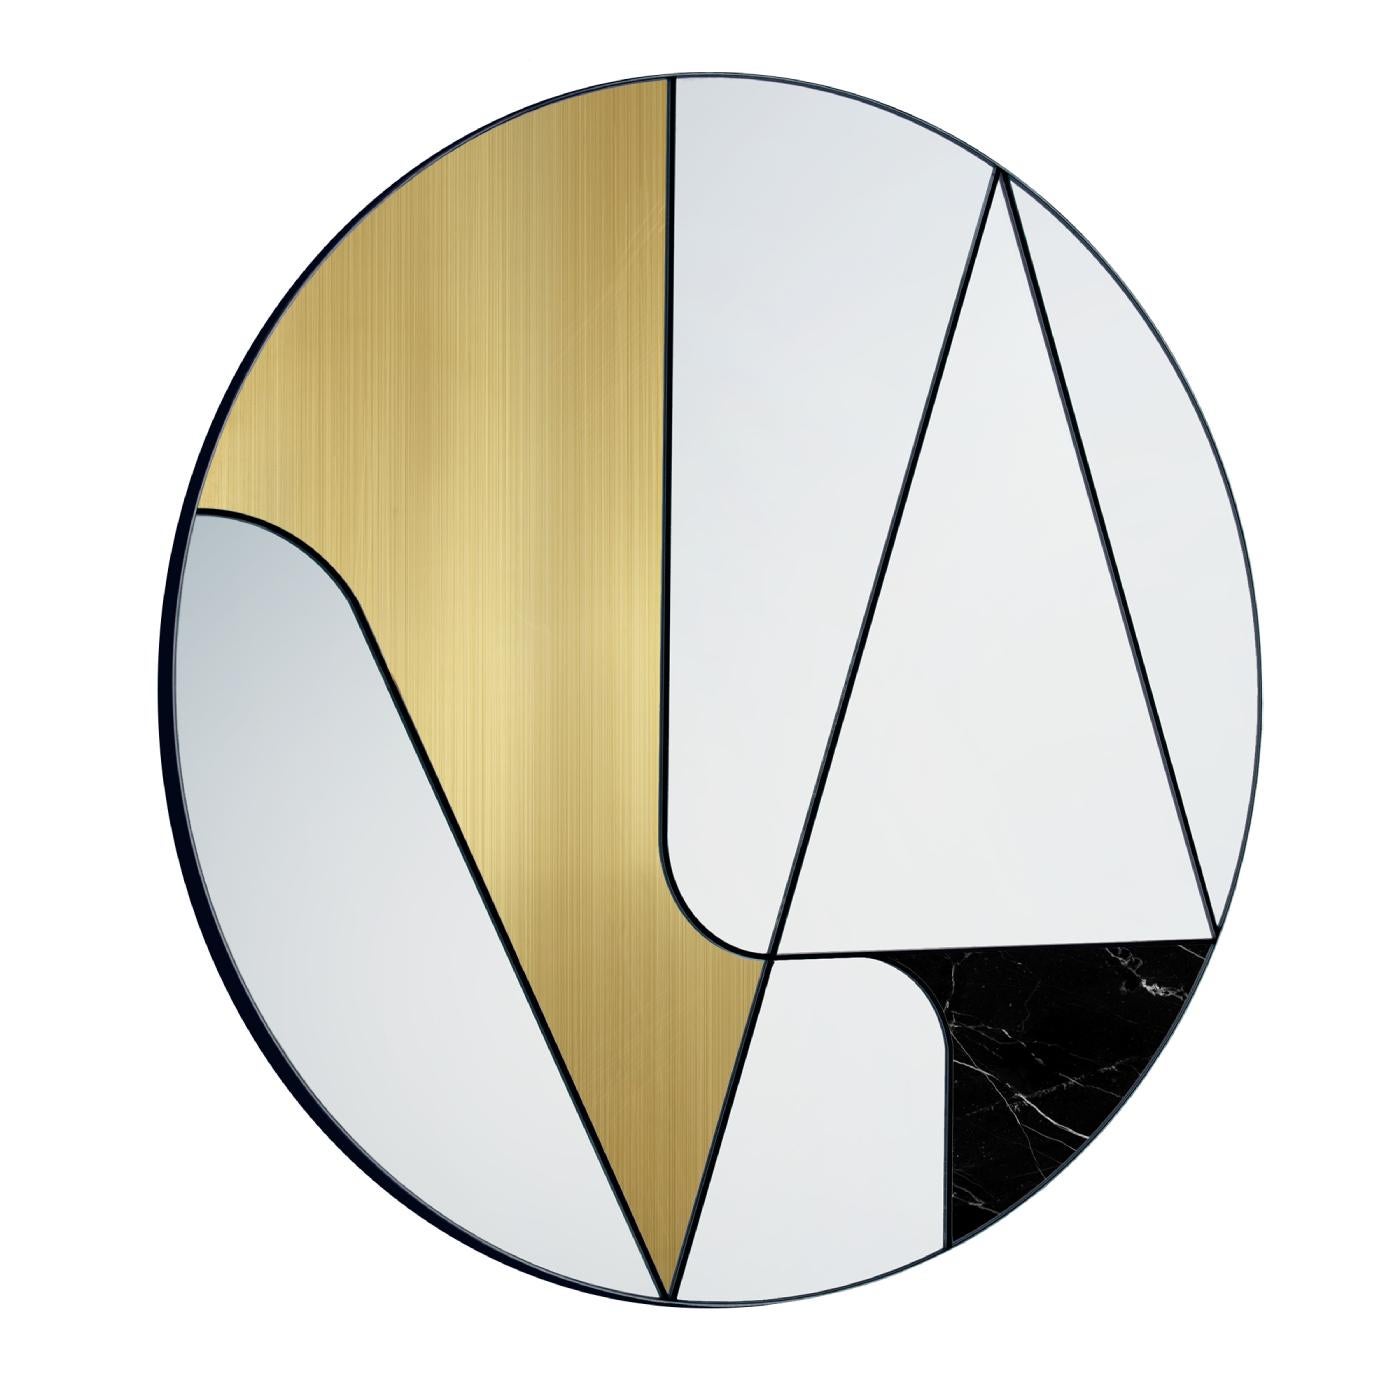 Combining rigorous geometry and asymmetrical proportions, this exquisite mirror is a one-of-a-kind addition to any contemporary interior. Crafted by expert hands, its various elements rest on a wooden base connected with steel setting and creating a